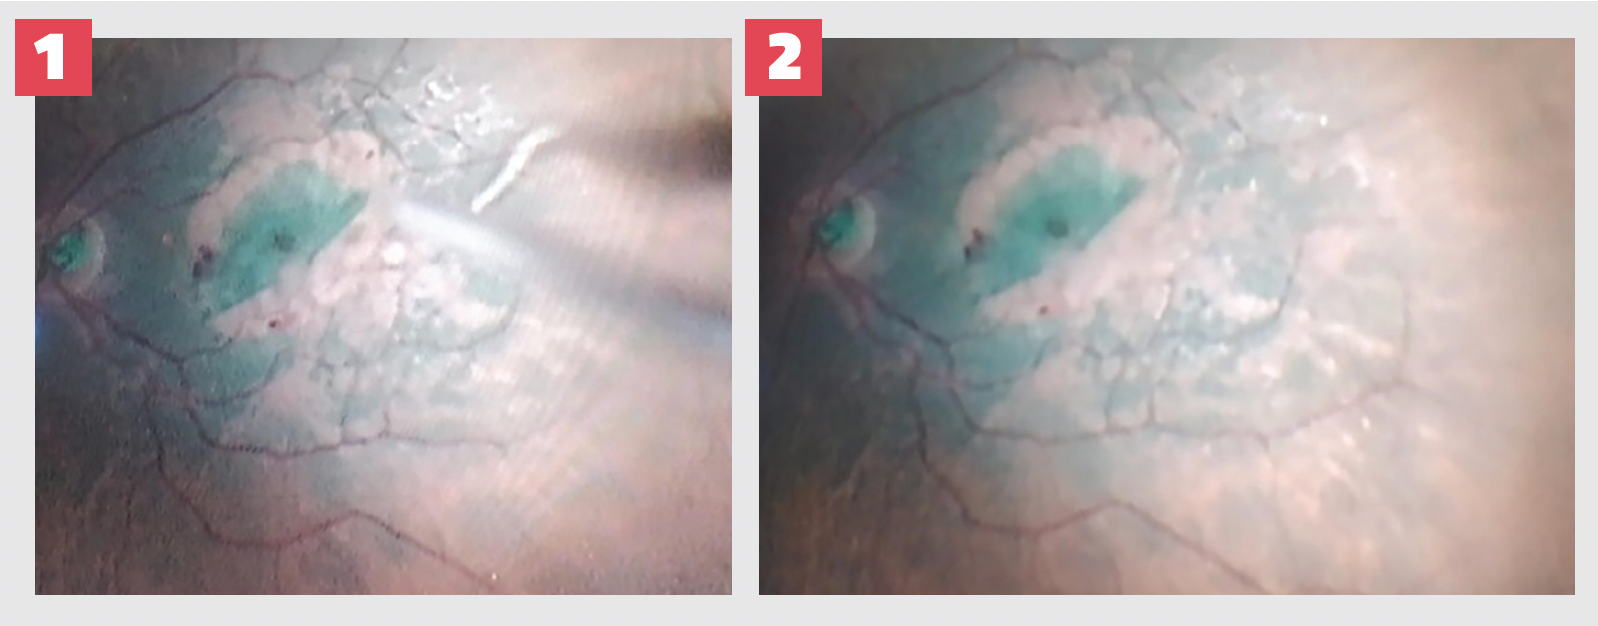 Figures 1 and 2. These intraoperative images show how to apply viscoelastic adhesive with a silicone-sleeve cannula over the internal limiting membrane used as flap.